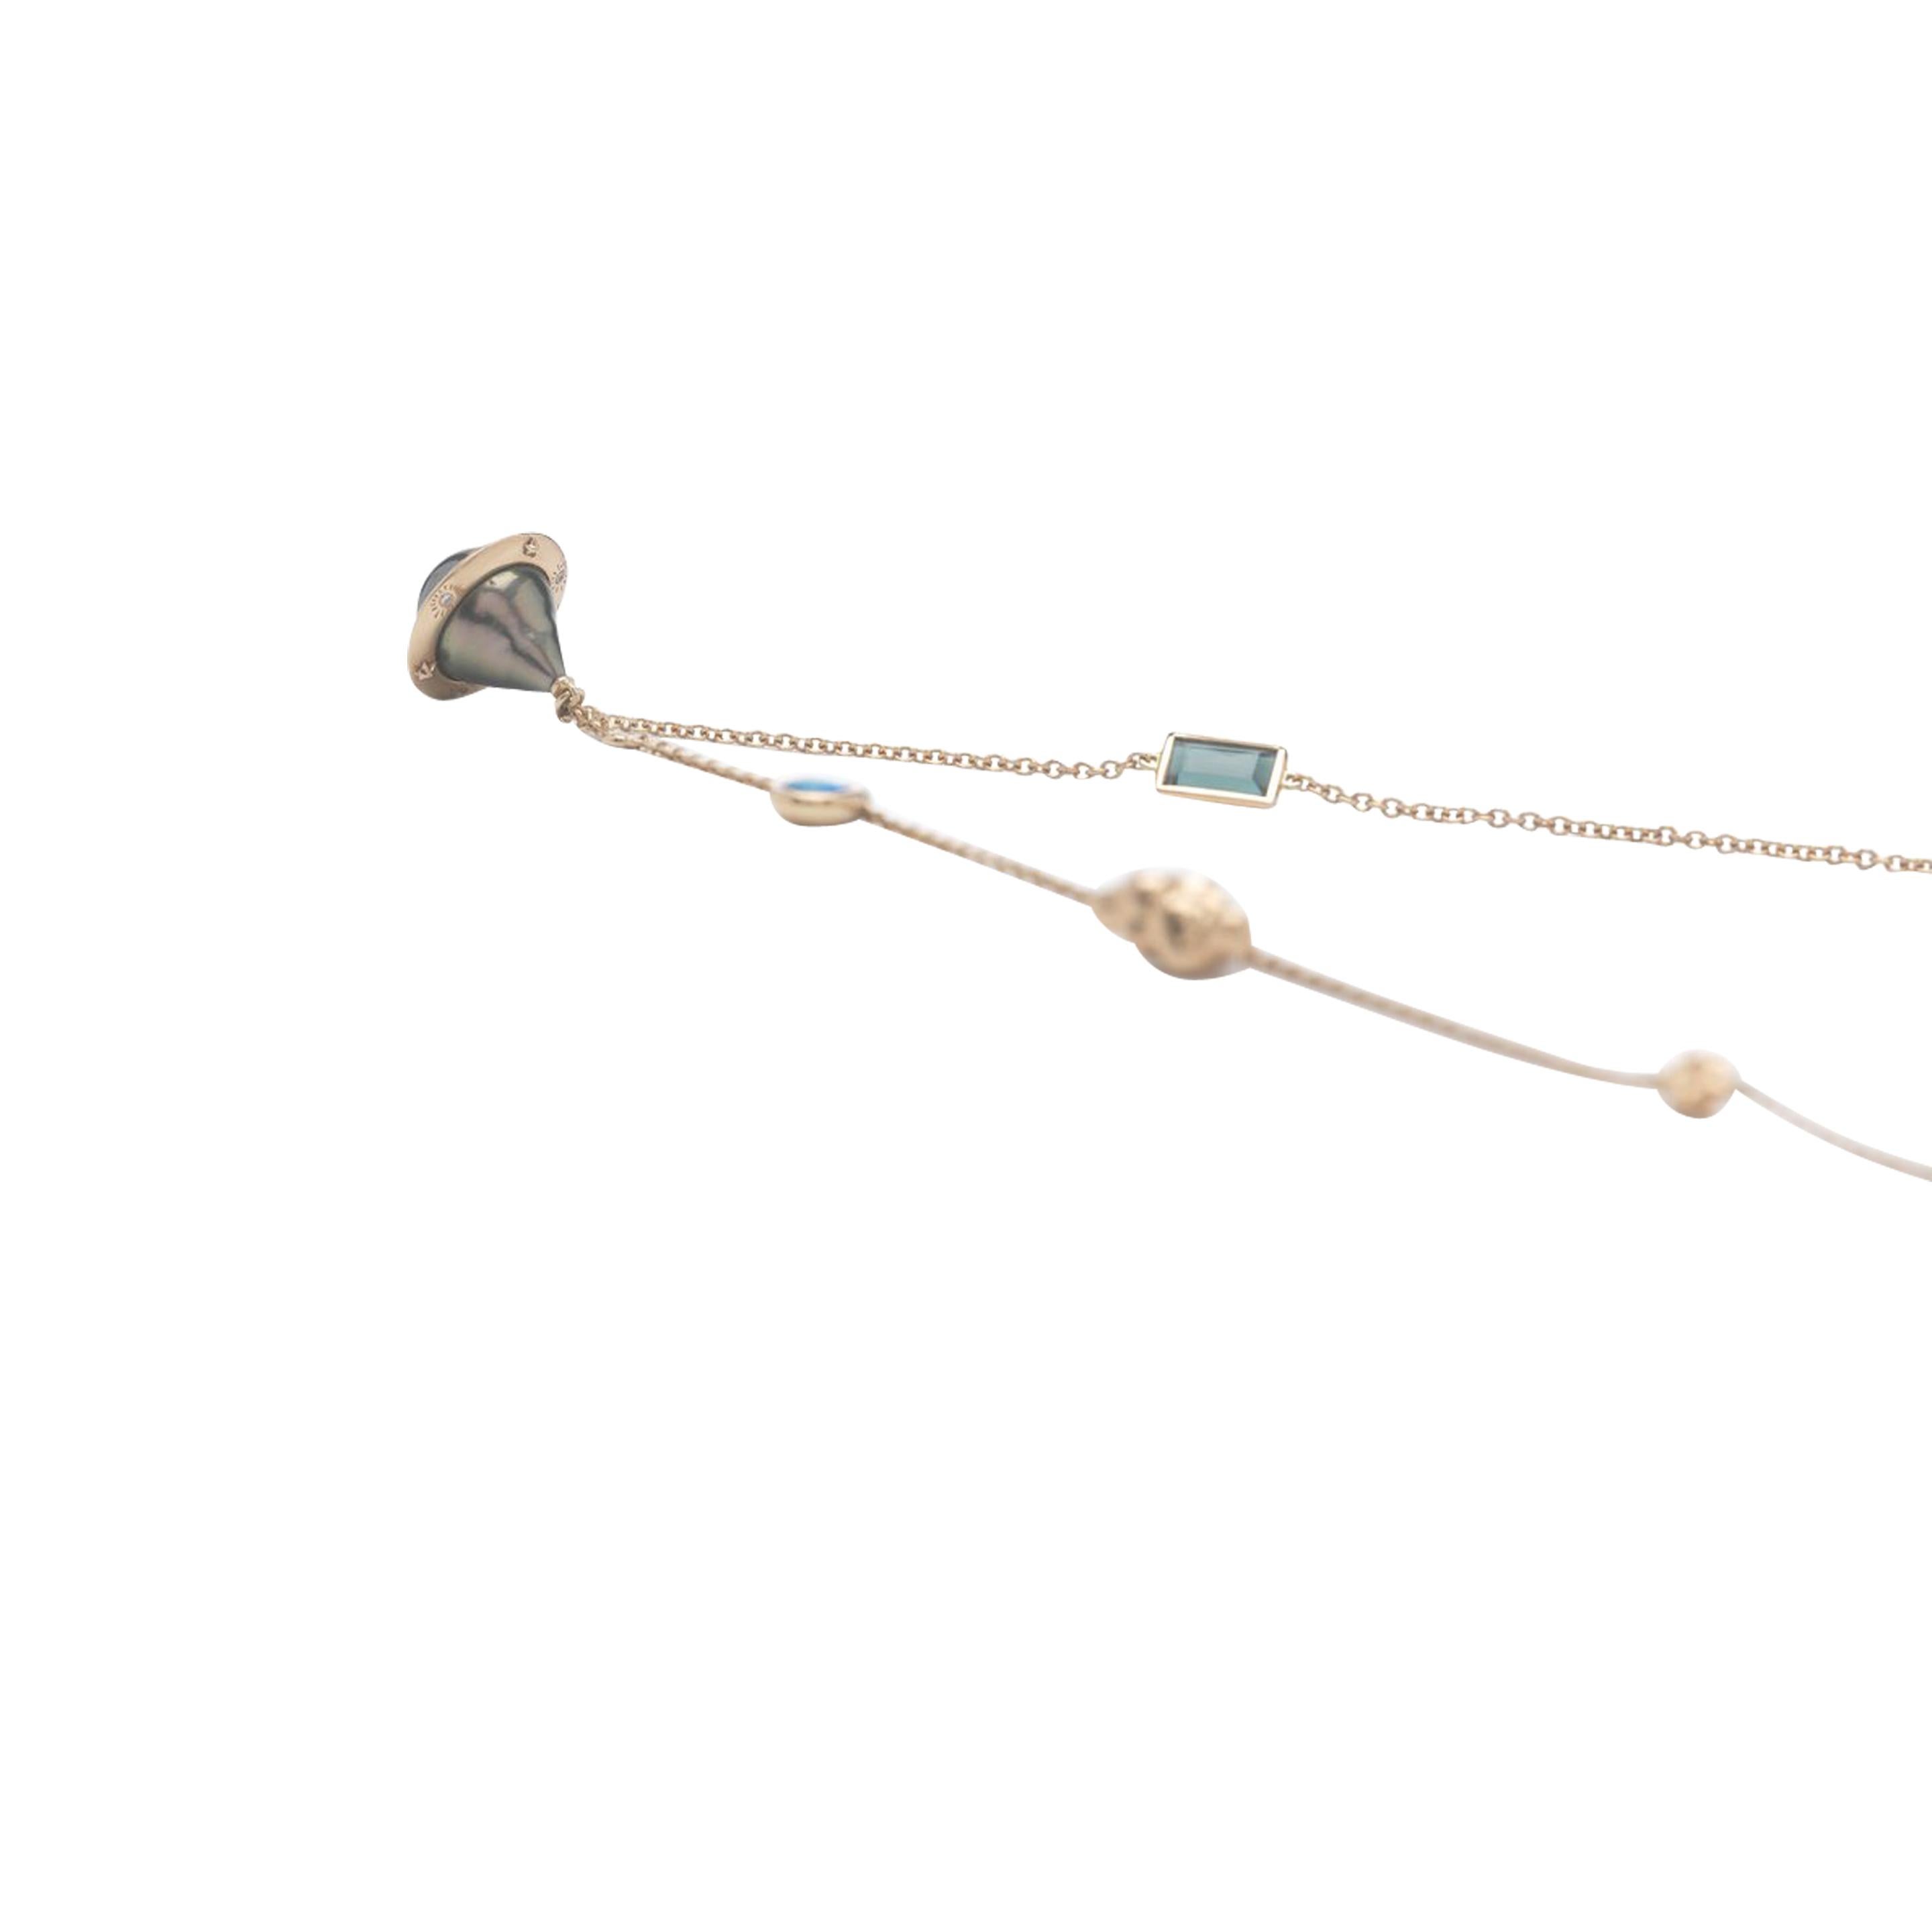 Designed as a delicate chain that sits on the collarbone, the Small Planet Necklace is fashioned in 18k rose gold, with small charms set along its length. One is a Tahitian pearl planet that sits alongside a tourmaline, an opal bead and a 18k rose